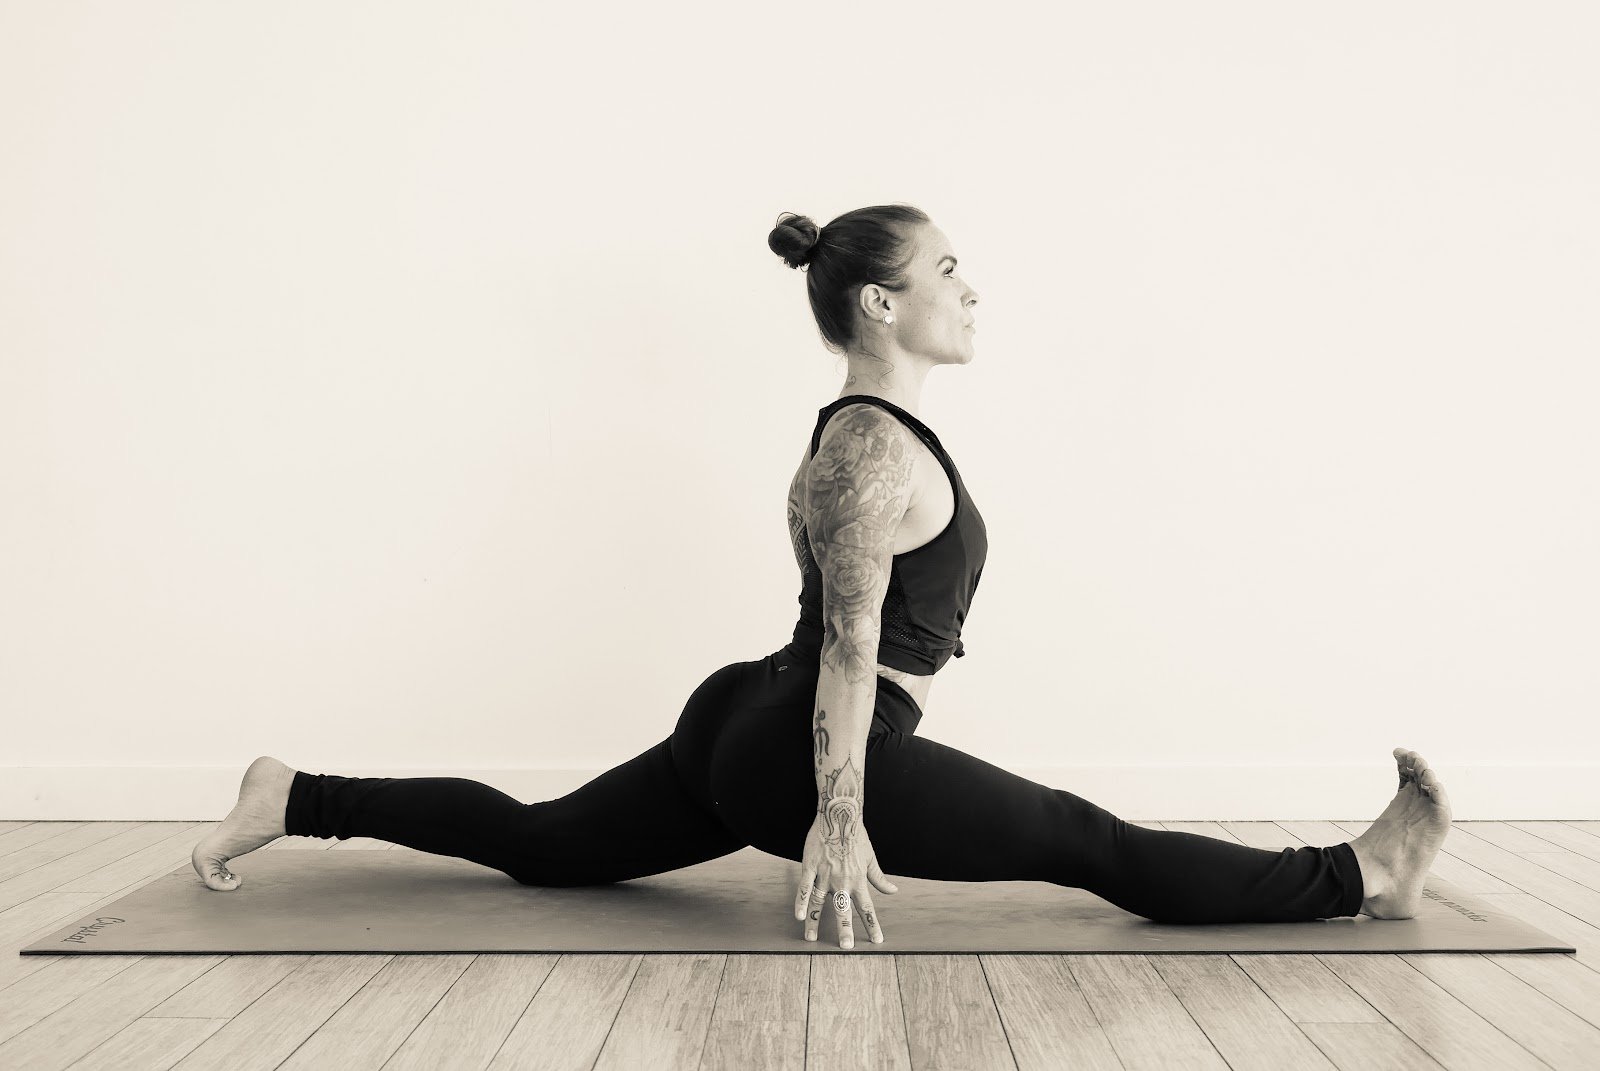 Monochrome image of a dedicated yoga instructor demonstrating an advanced split pose at Shala Yoga studio in Squamish, her tattoos adding to the artistic expression of strength and flexibility